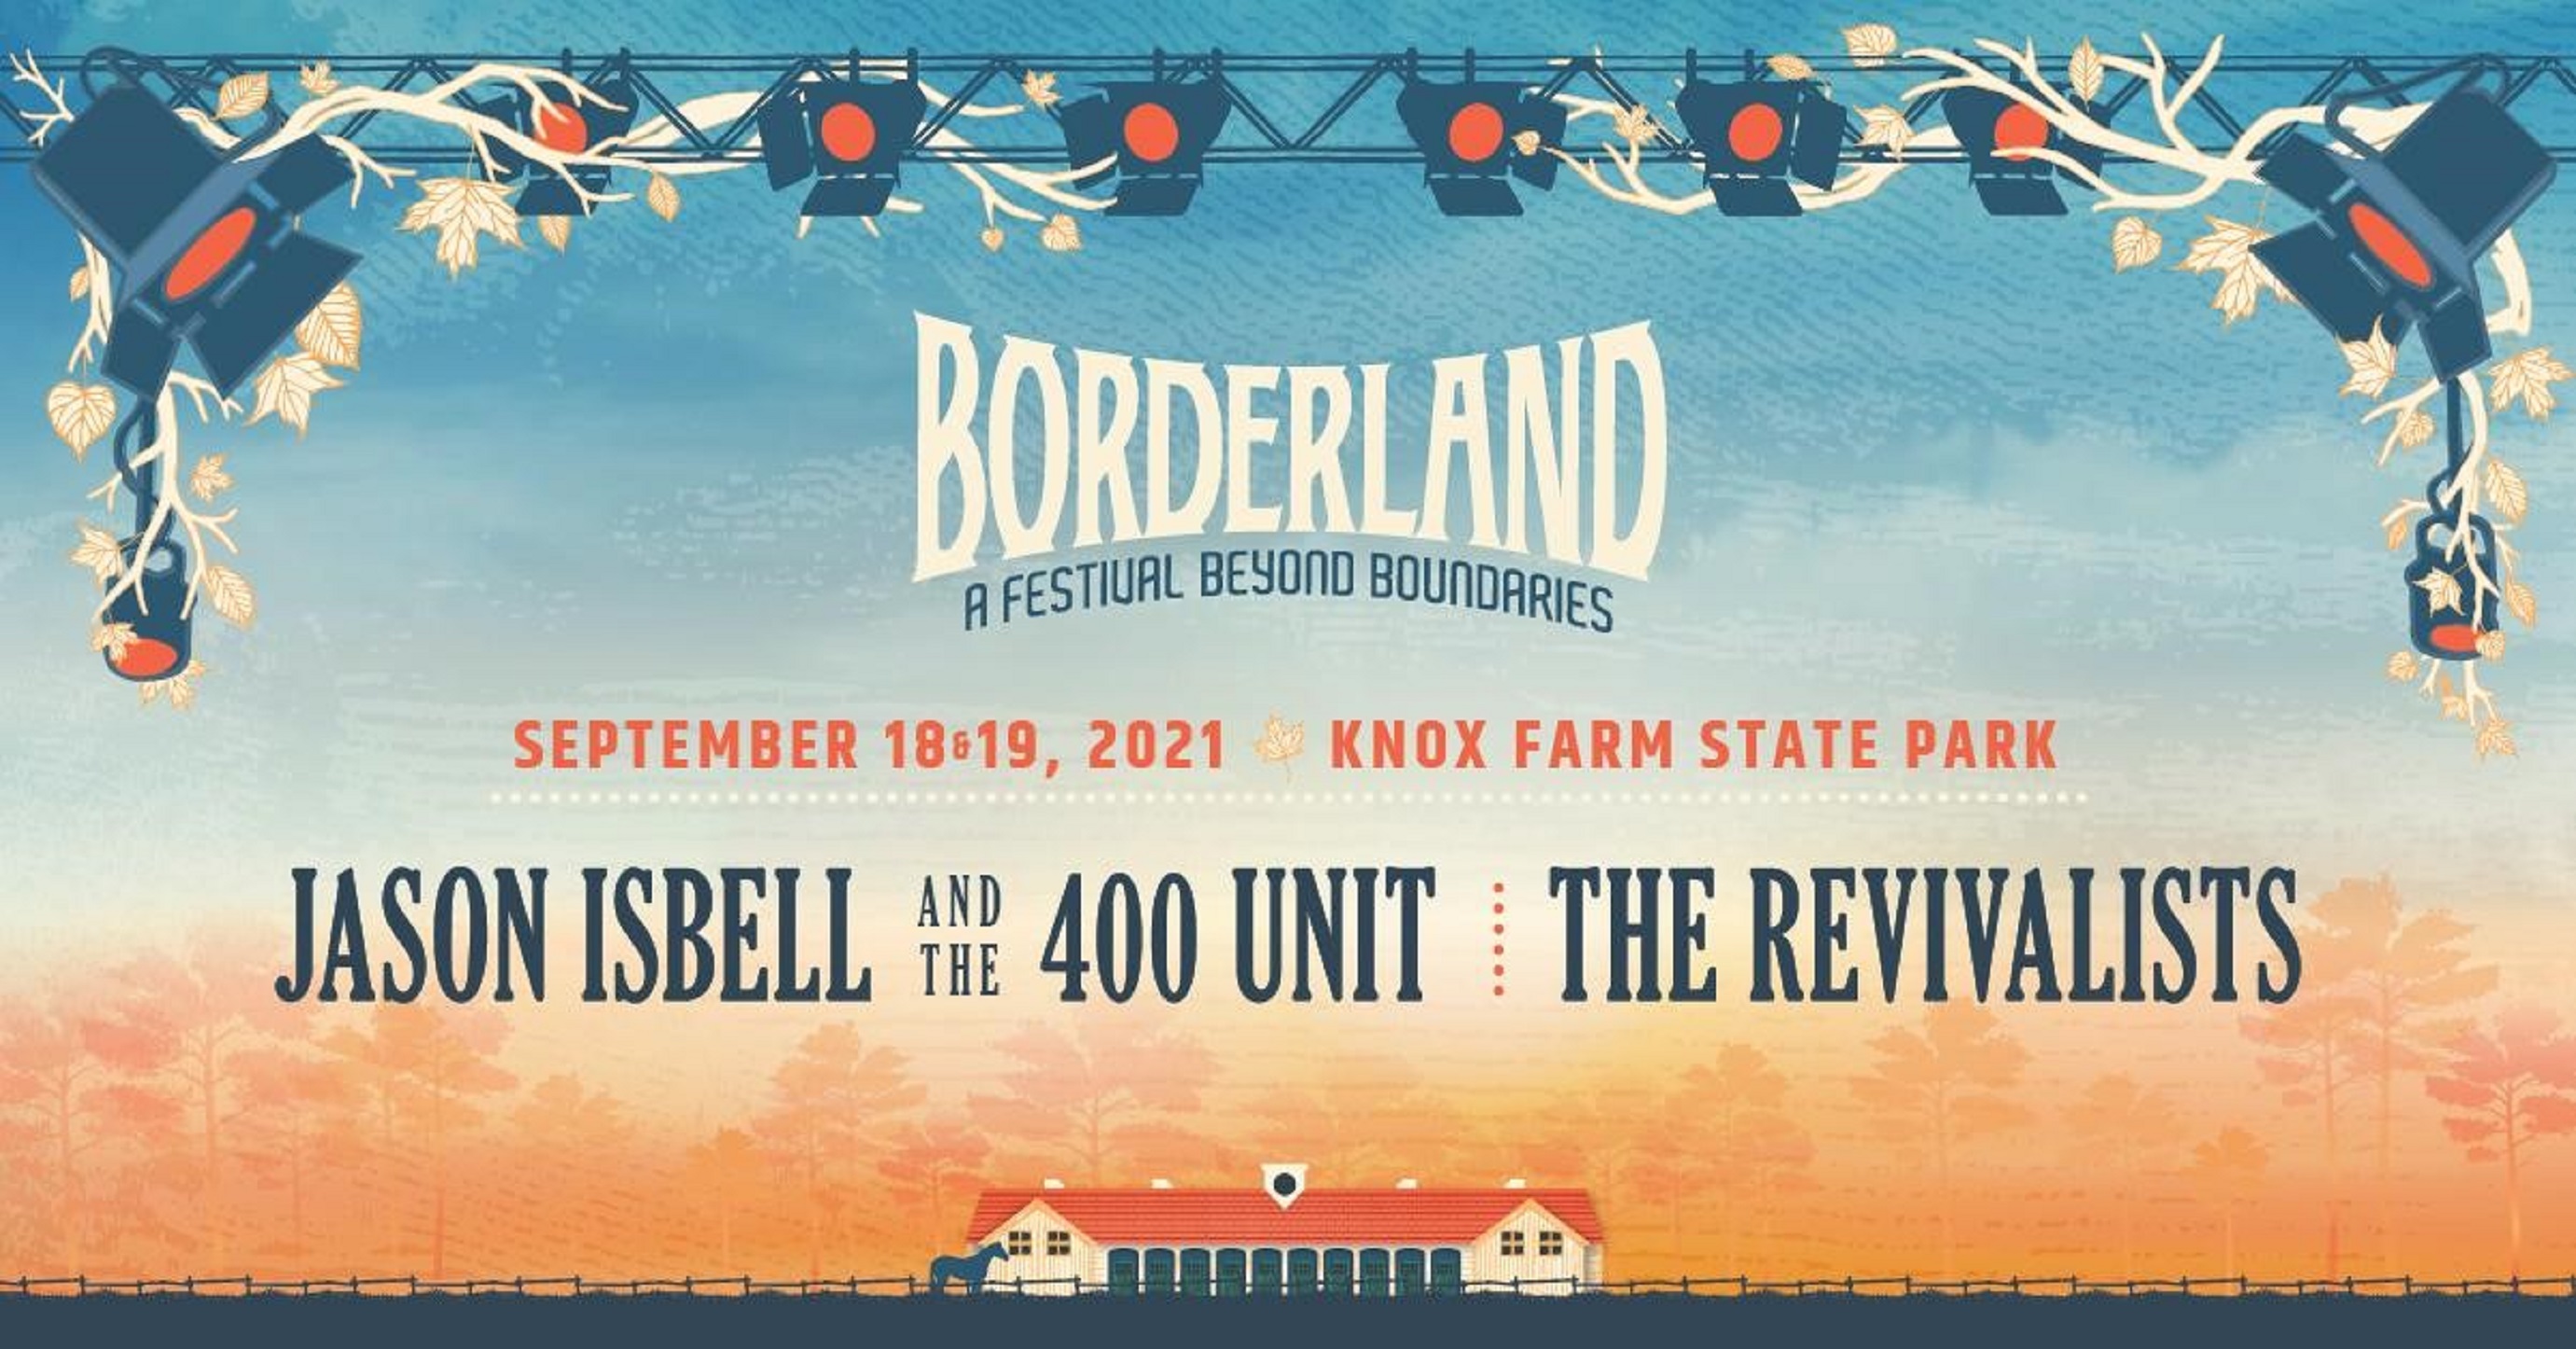 Borderland Festival Announced Lineup Feat. Jason Isbell, Infamous Stringdusters & Pigeons Playing Ping Pong